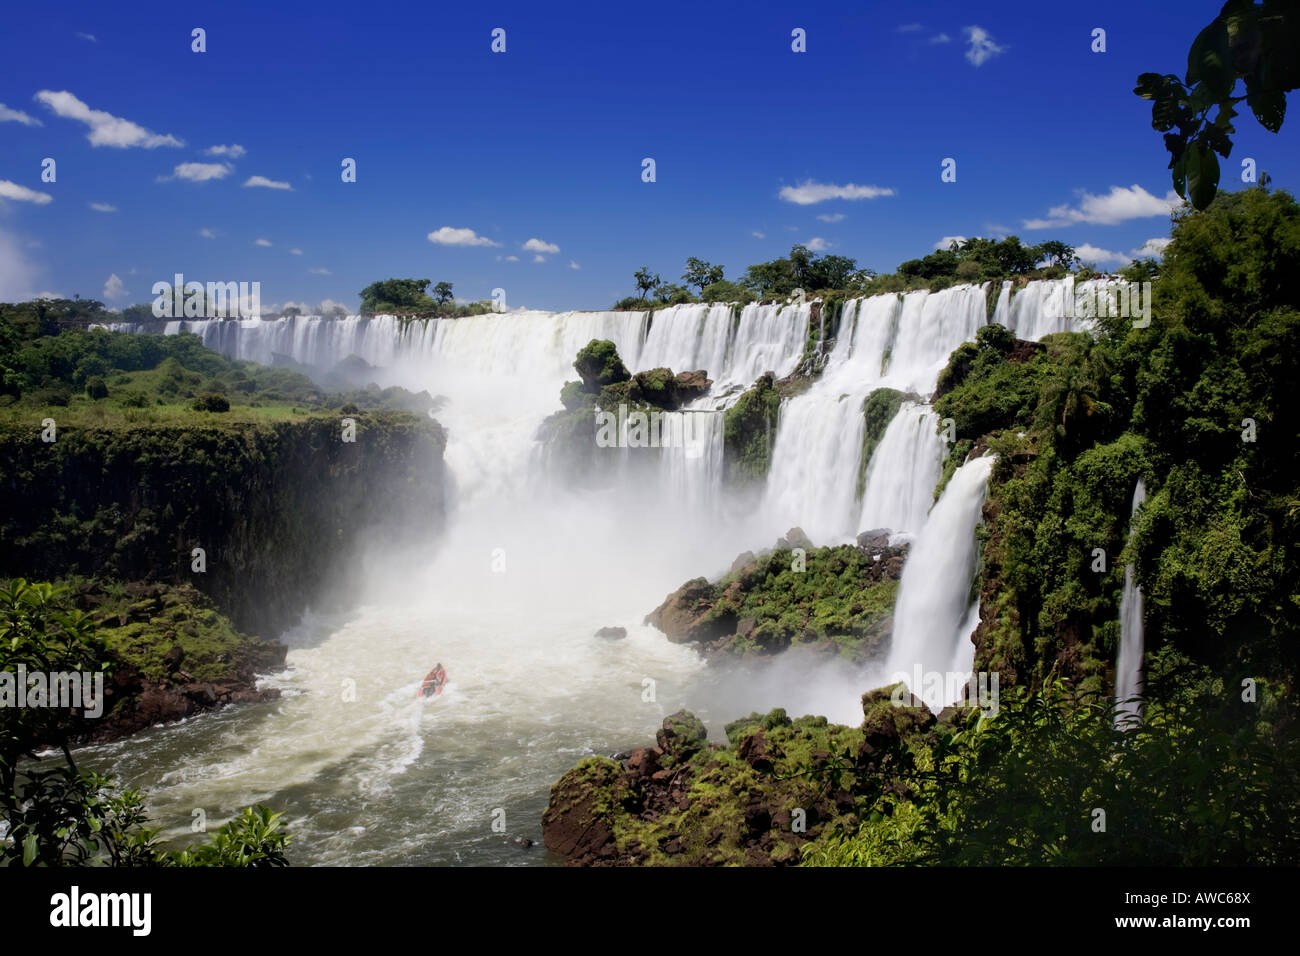 Iguassu Falls is the largest series of waterfalls on the planet This image shows one of the river tour boats Stock Photo